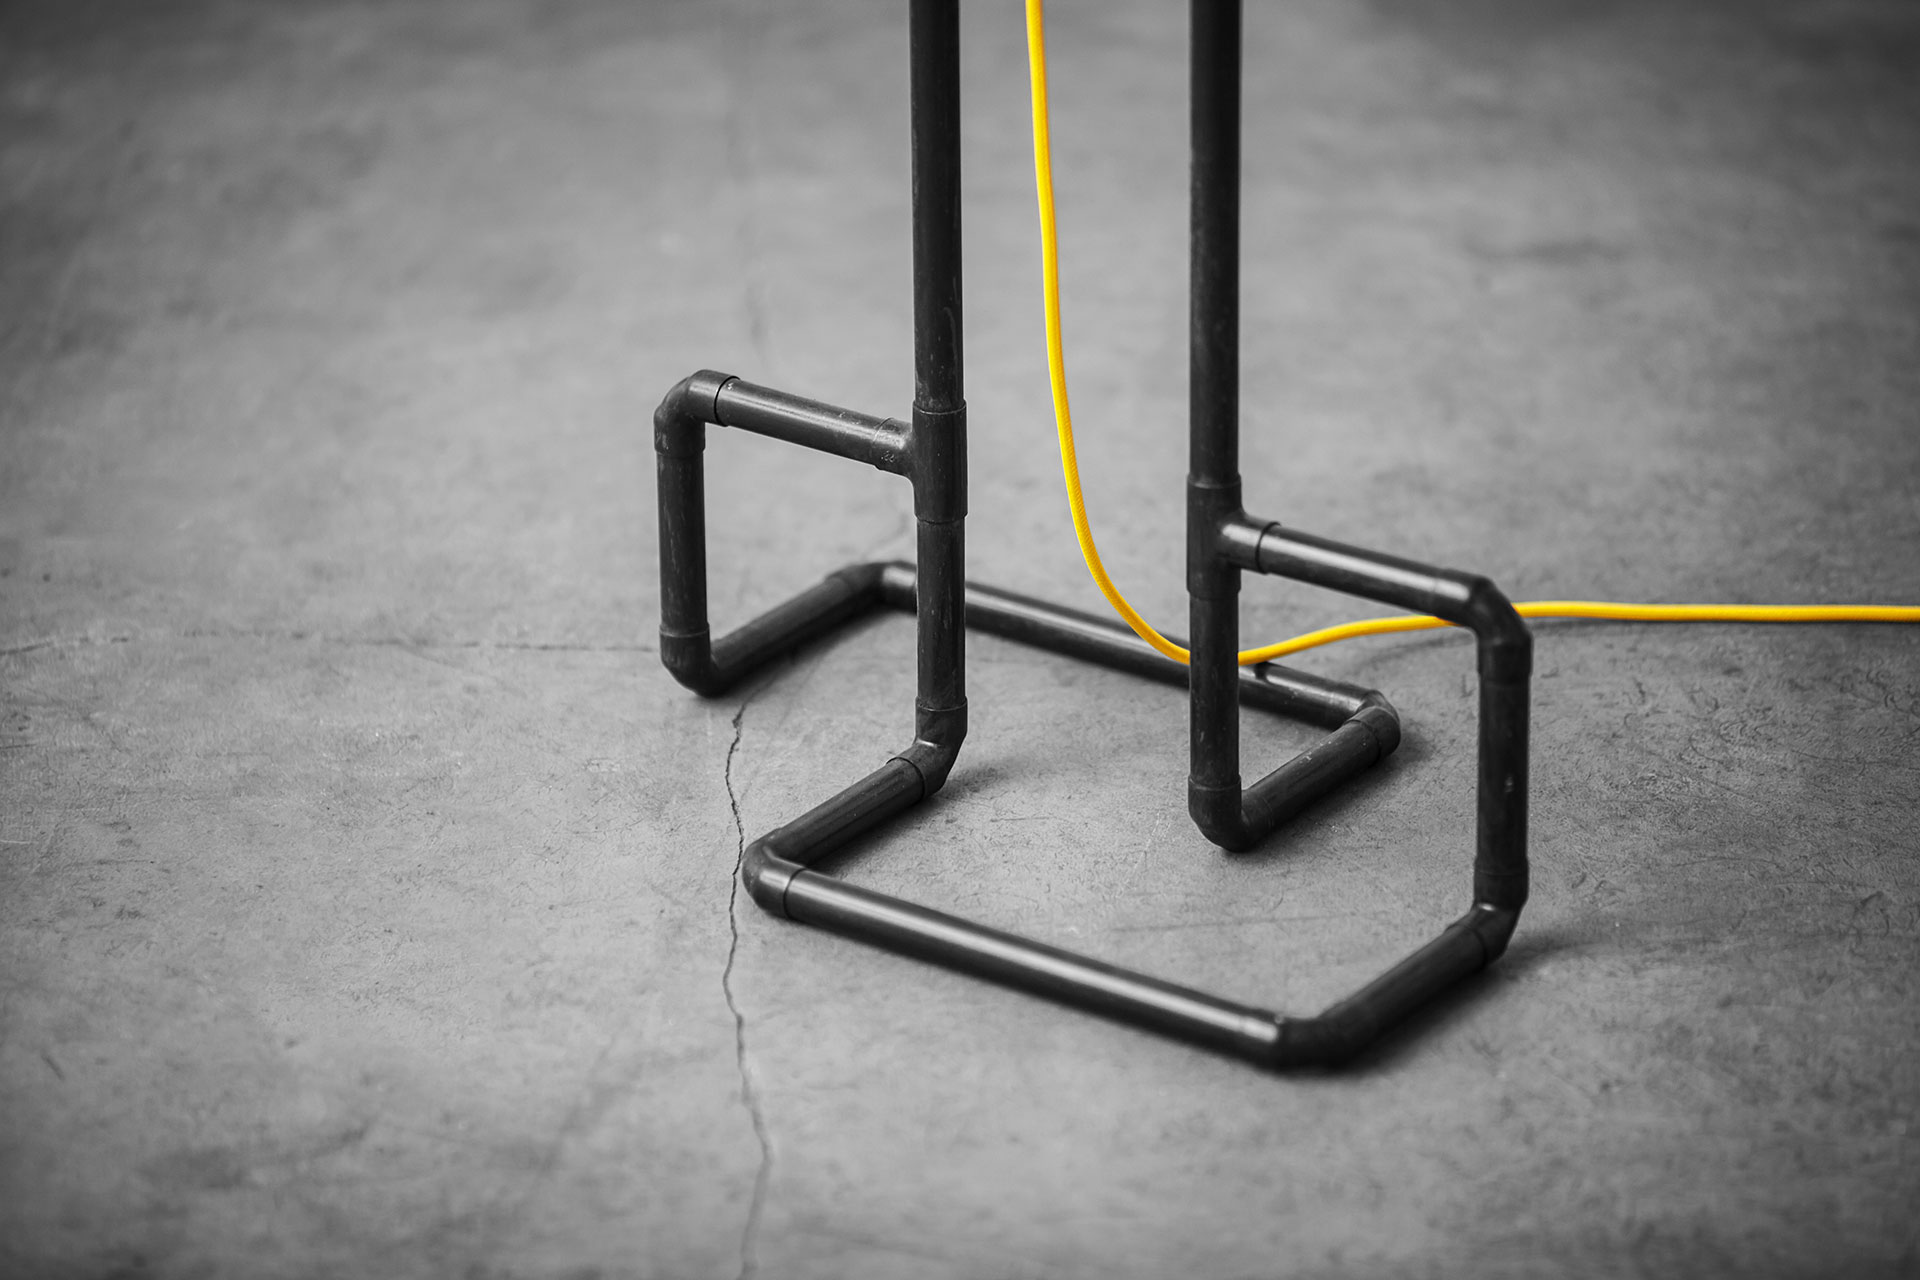 Designer floor lamp detail in black patina with yellow braided cord